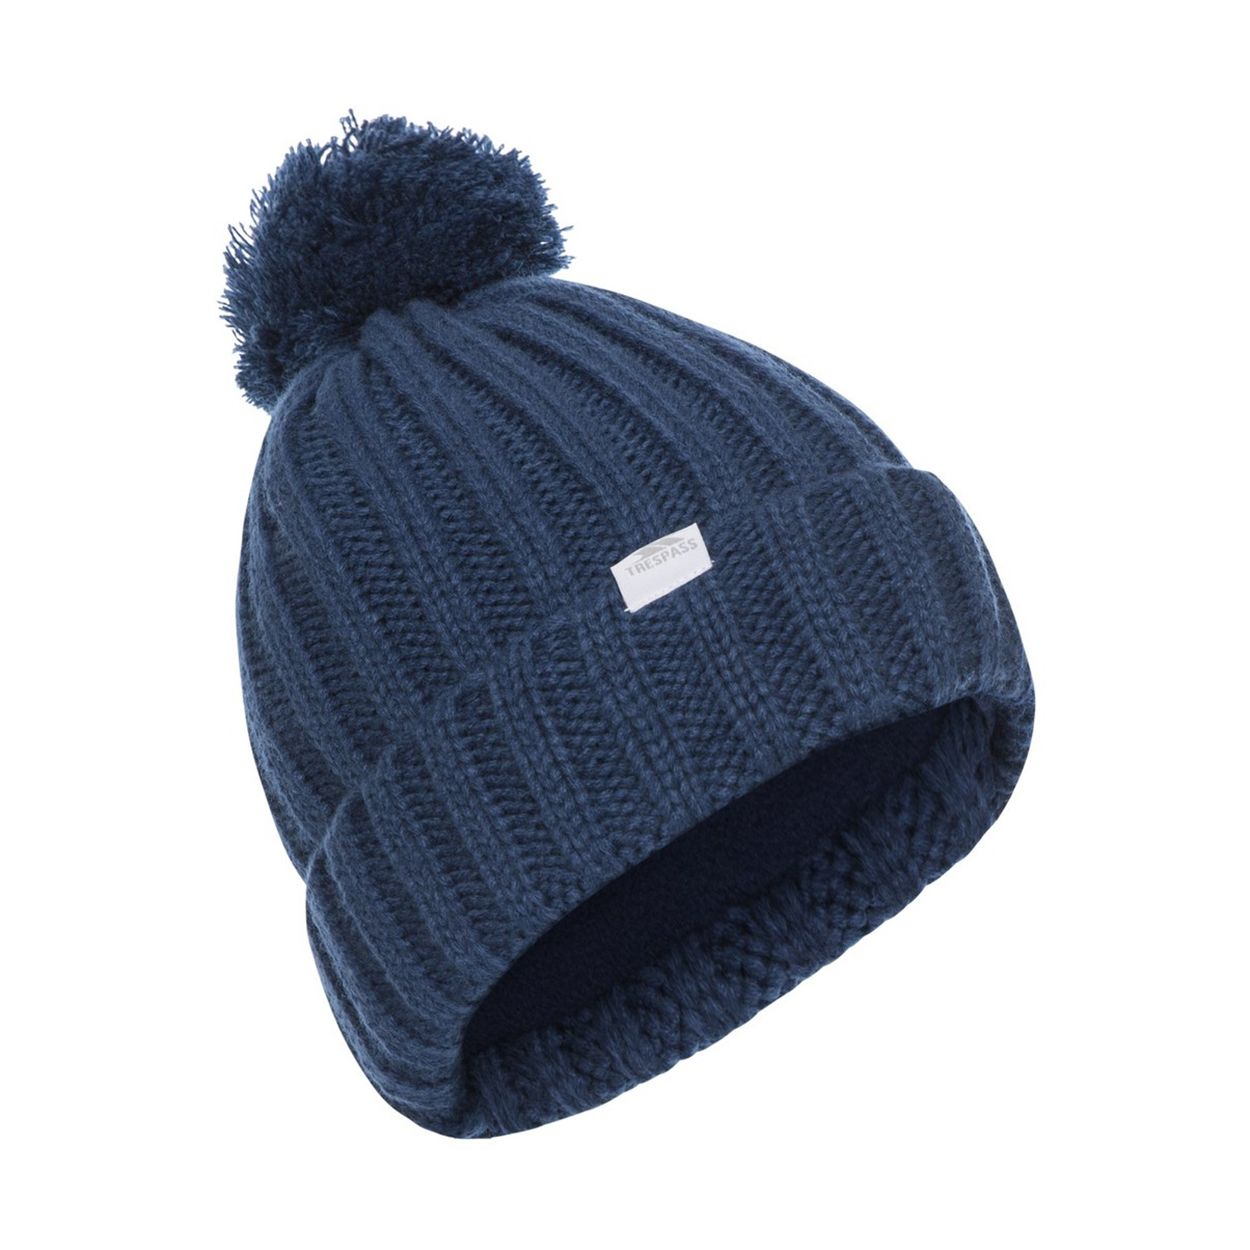 Knitted hat with pom pom. Fully fleece lined. Woven label. Outer: 100% Acrylic, Lining: 100% Polyester anti pil fleece.